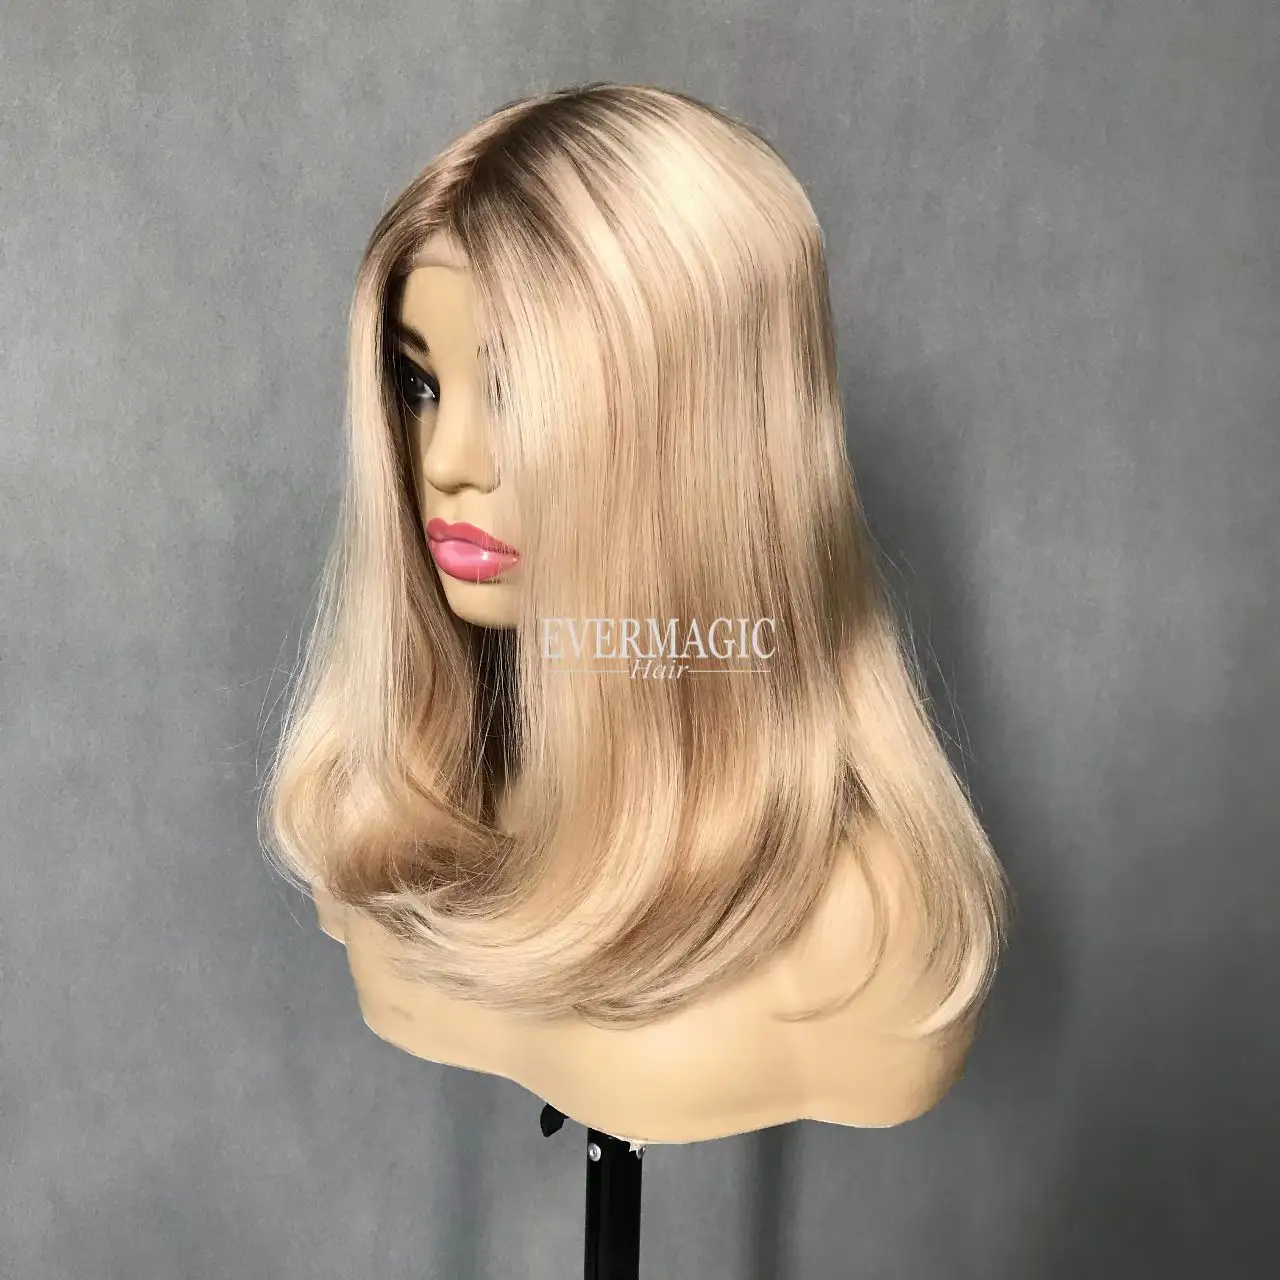 New Arrival New Style Medical Wigs Mono Top With Back Weft Human Virgin Hair #T8/25 Ombre Blonde Color Straight Women Short Wig